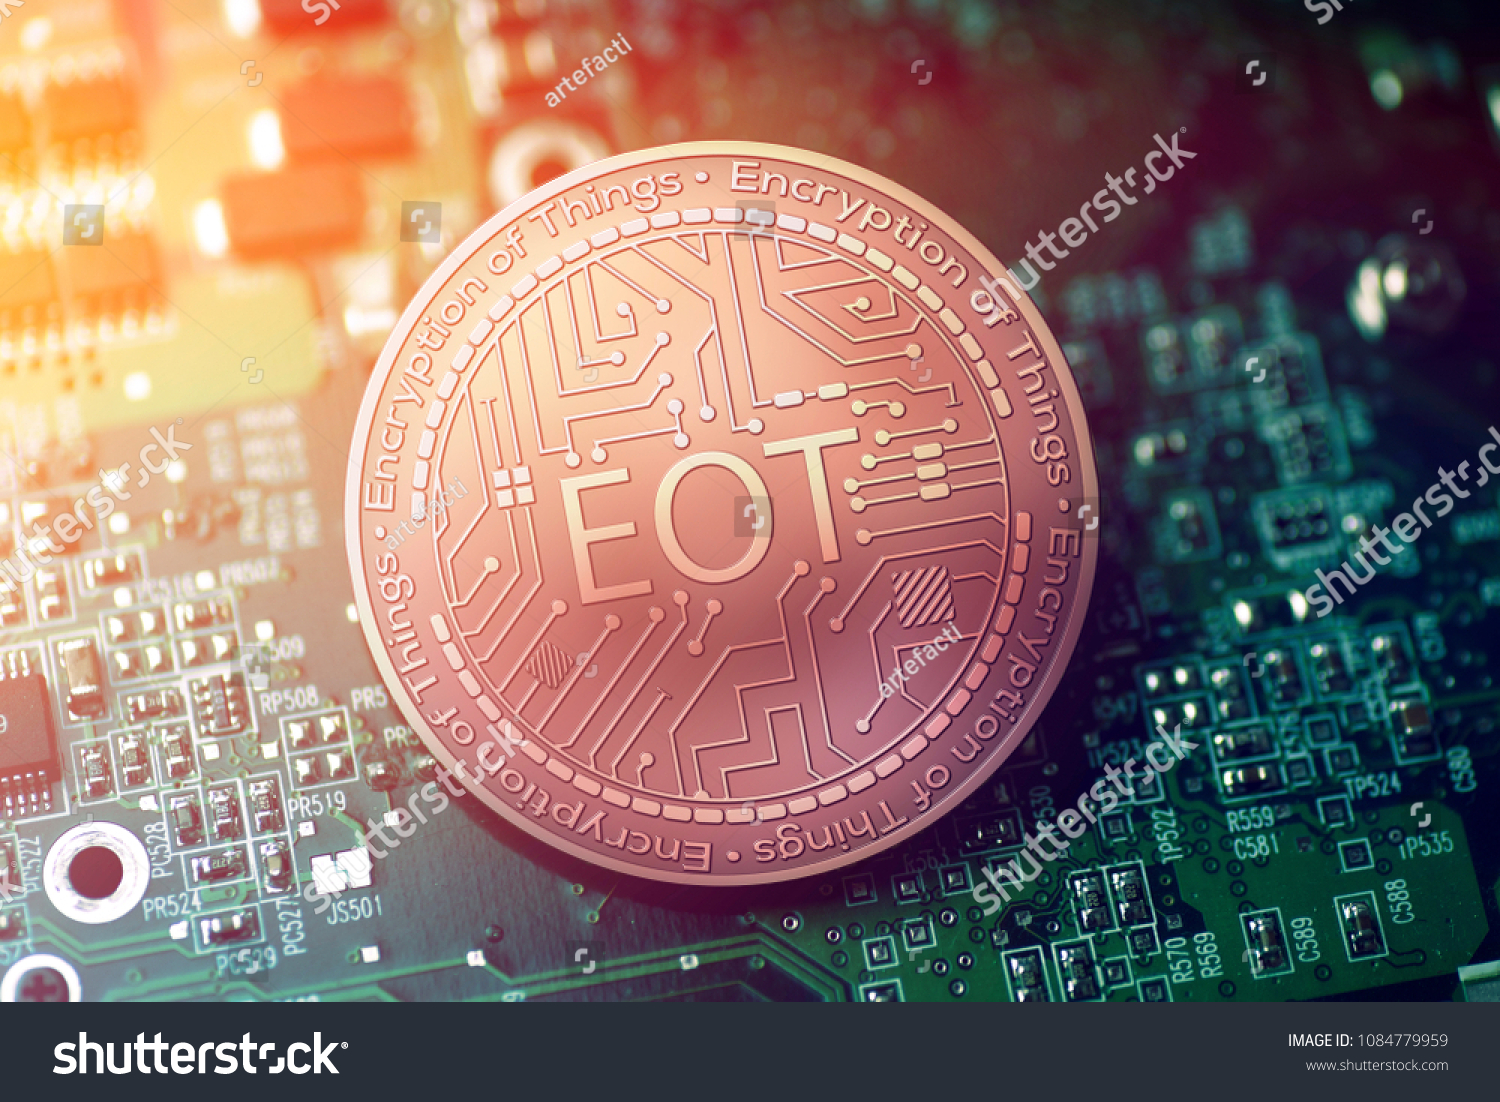 Eot crypto cryptocurrency in india